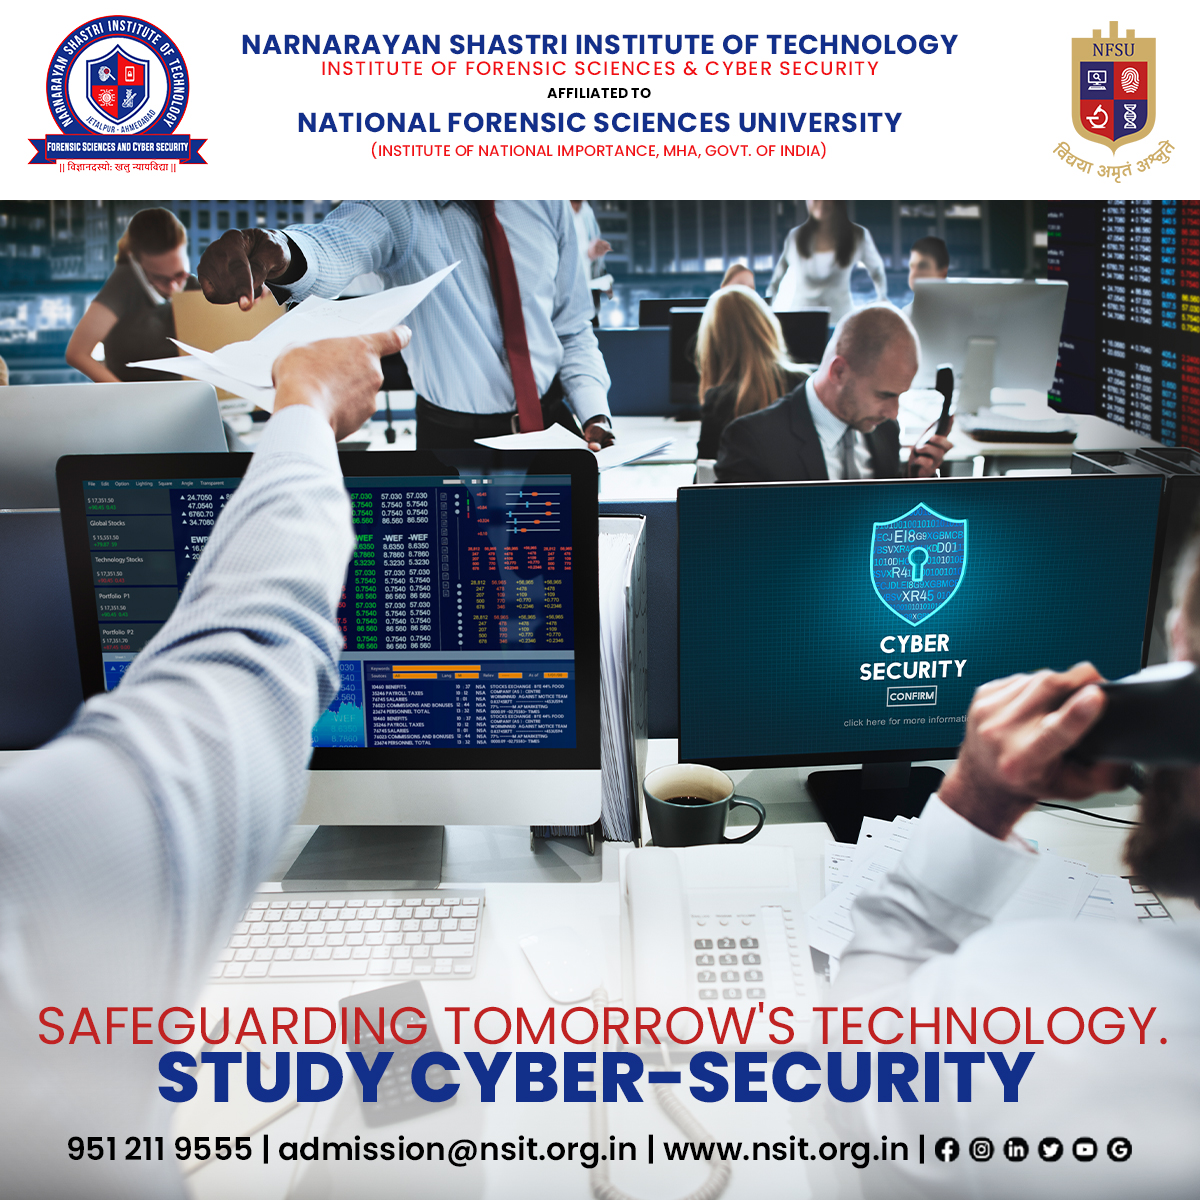 Cyber Security helps you to stay ahead with technological advancements and teaches you to safeguard it.

#nsit #nsitjetalpur #digitalforensics #cybersecurity #ForensicScience #forensics #ahmedabad #AdmissionOpen #ifscs #security #technology #cybercrime #privacy #college #student